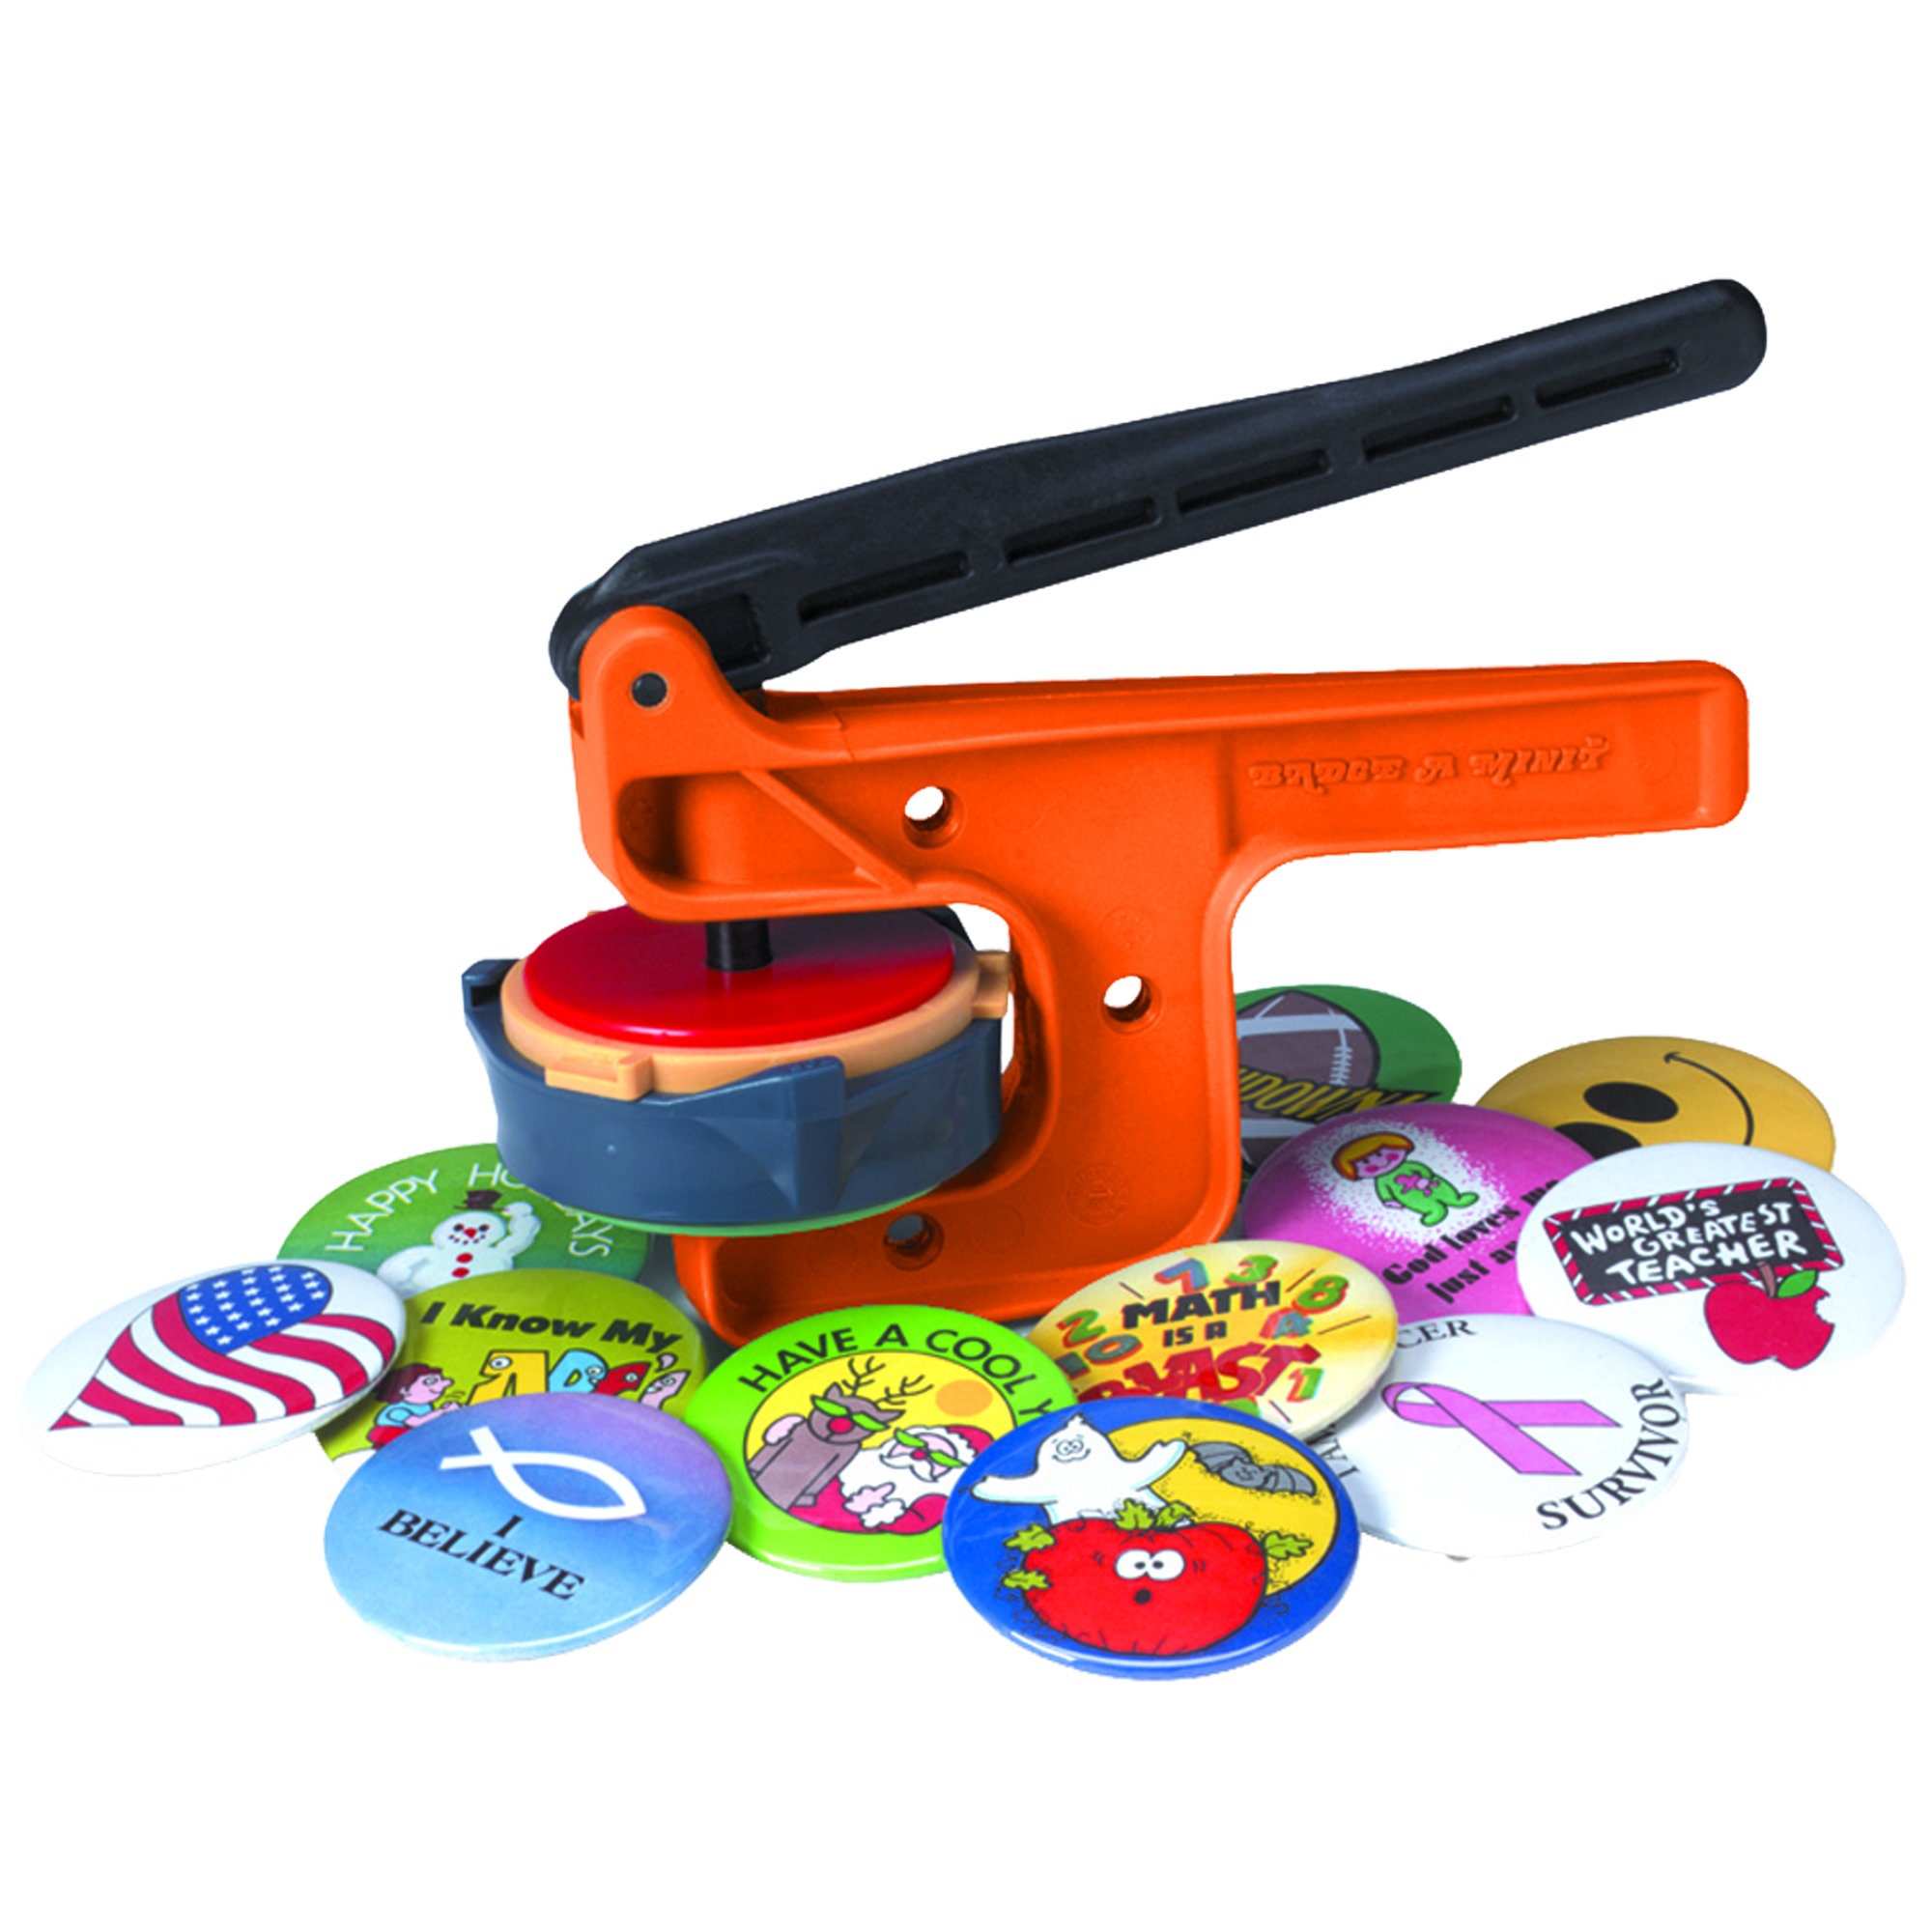 Everything for your 3 Badge-A-Minit Button Maker – People Power Press for  Custom Buttons, Button Makers, Button Machines and Button & Pin Parts